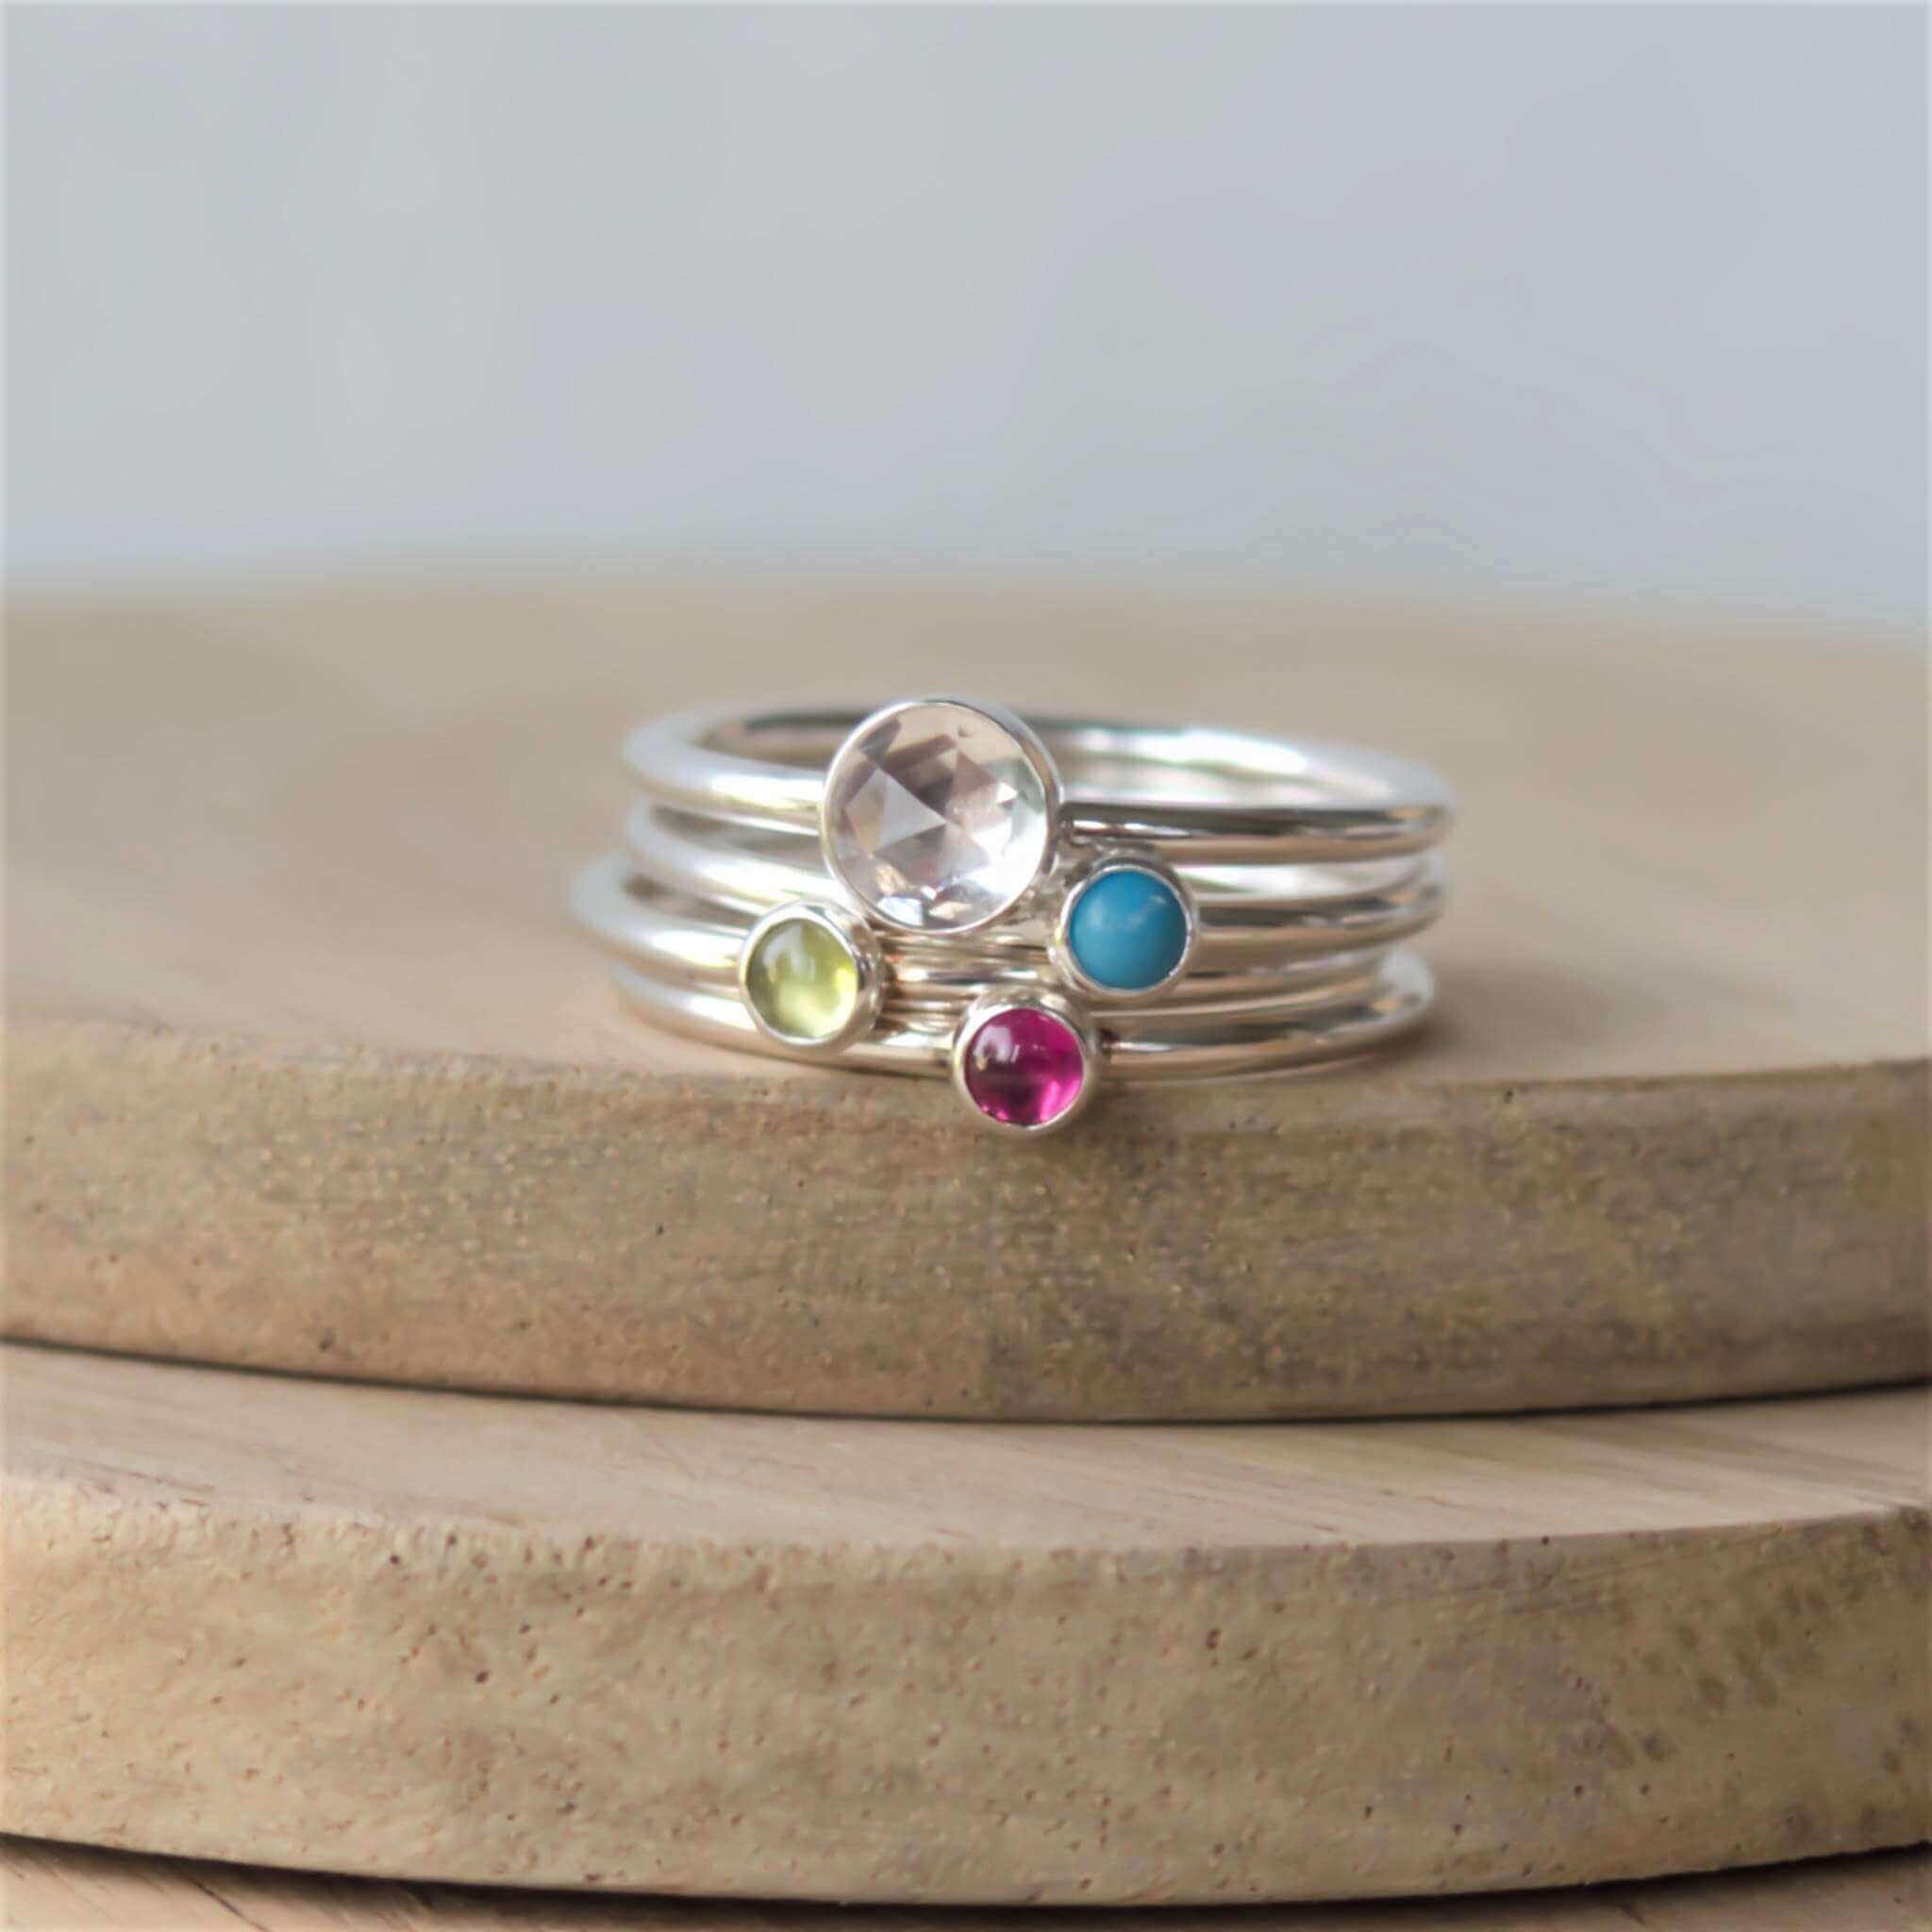 Four ring set of silver rings with different sized gemstones. Includes a 5mm facet clear topaz, turquoise, peridot and pink lab ruby all 3mm in size. Handmade by maram jewellery in Edinburgh